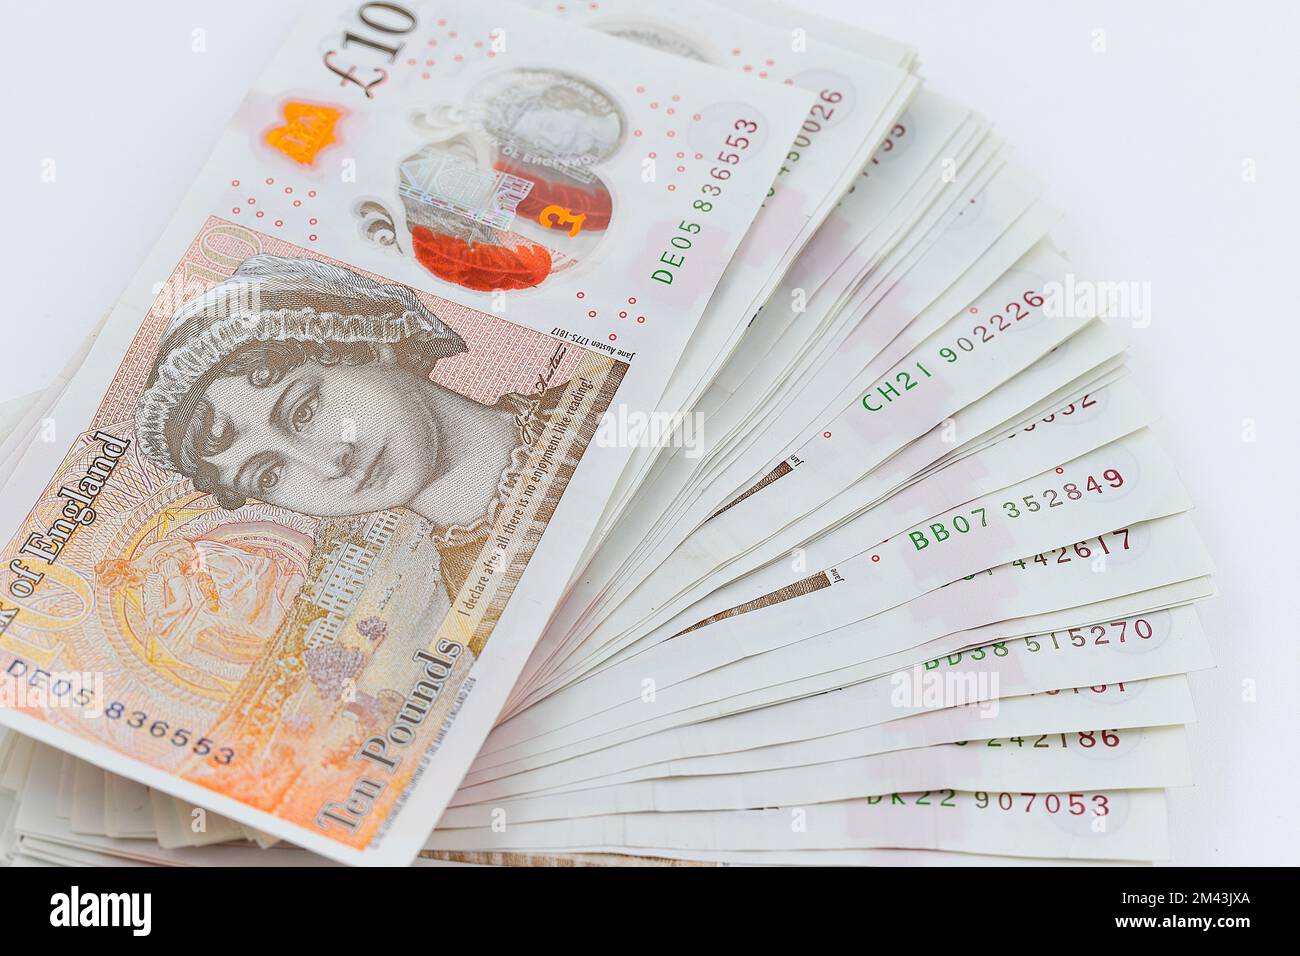 A pile of Bank of England polymer £10 notes showing Jane Austen on the rear Stock Photo